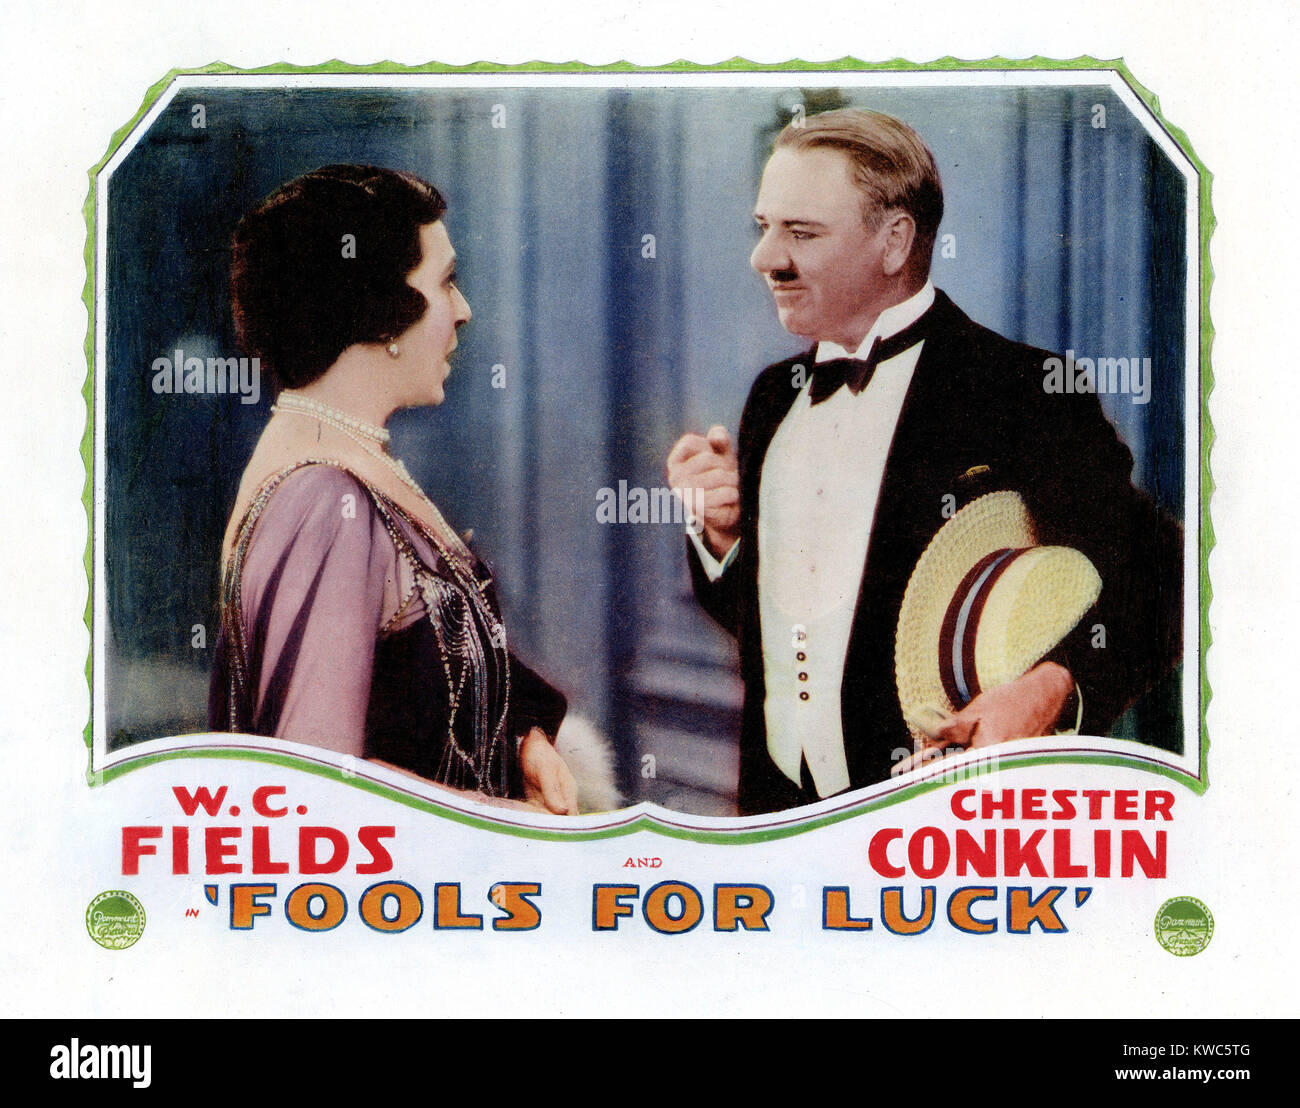 FOOLS FOR LUCK, right: W.C. Fields on lobbycard, 1928. Stock Photo